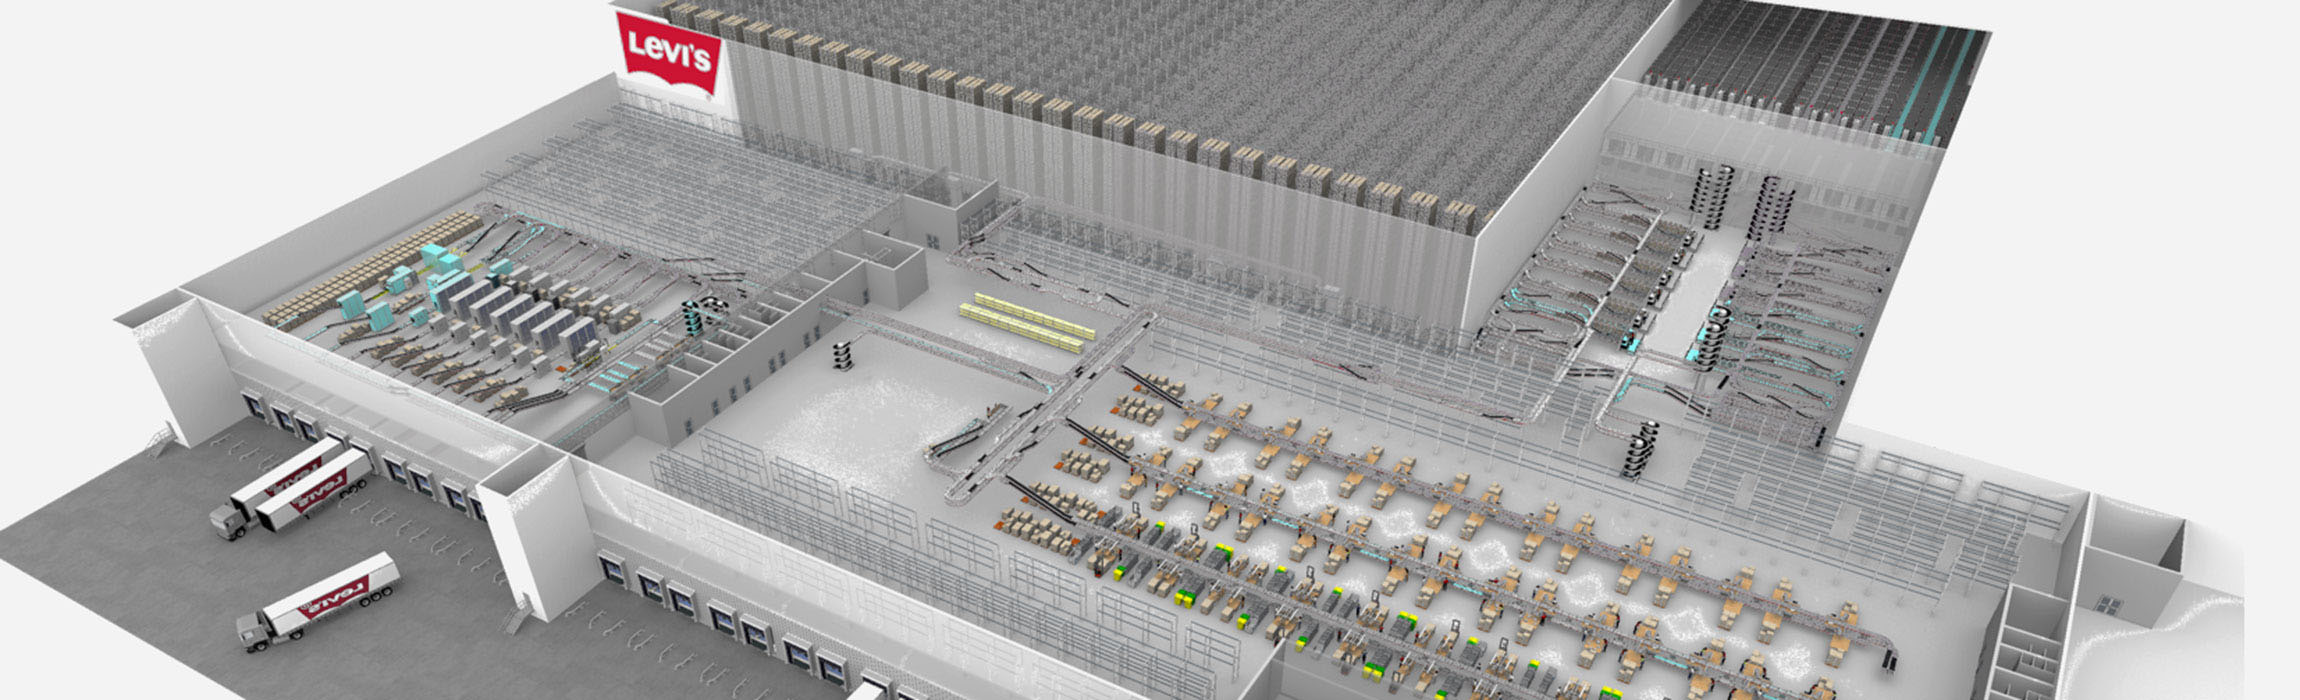 Levi Strauss & Co. builds one of Europe's largest logistics hubs with TGW